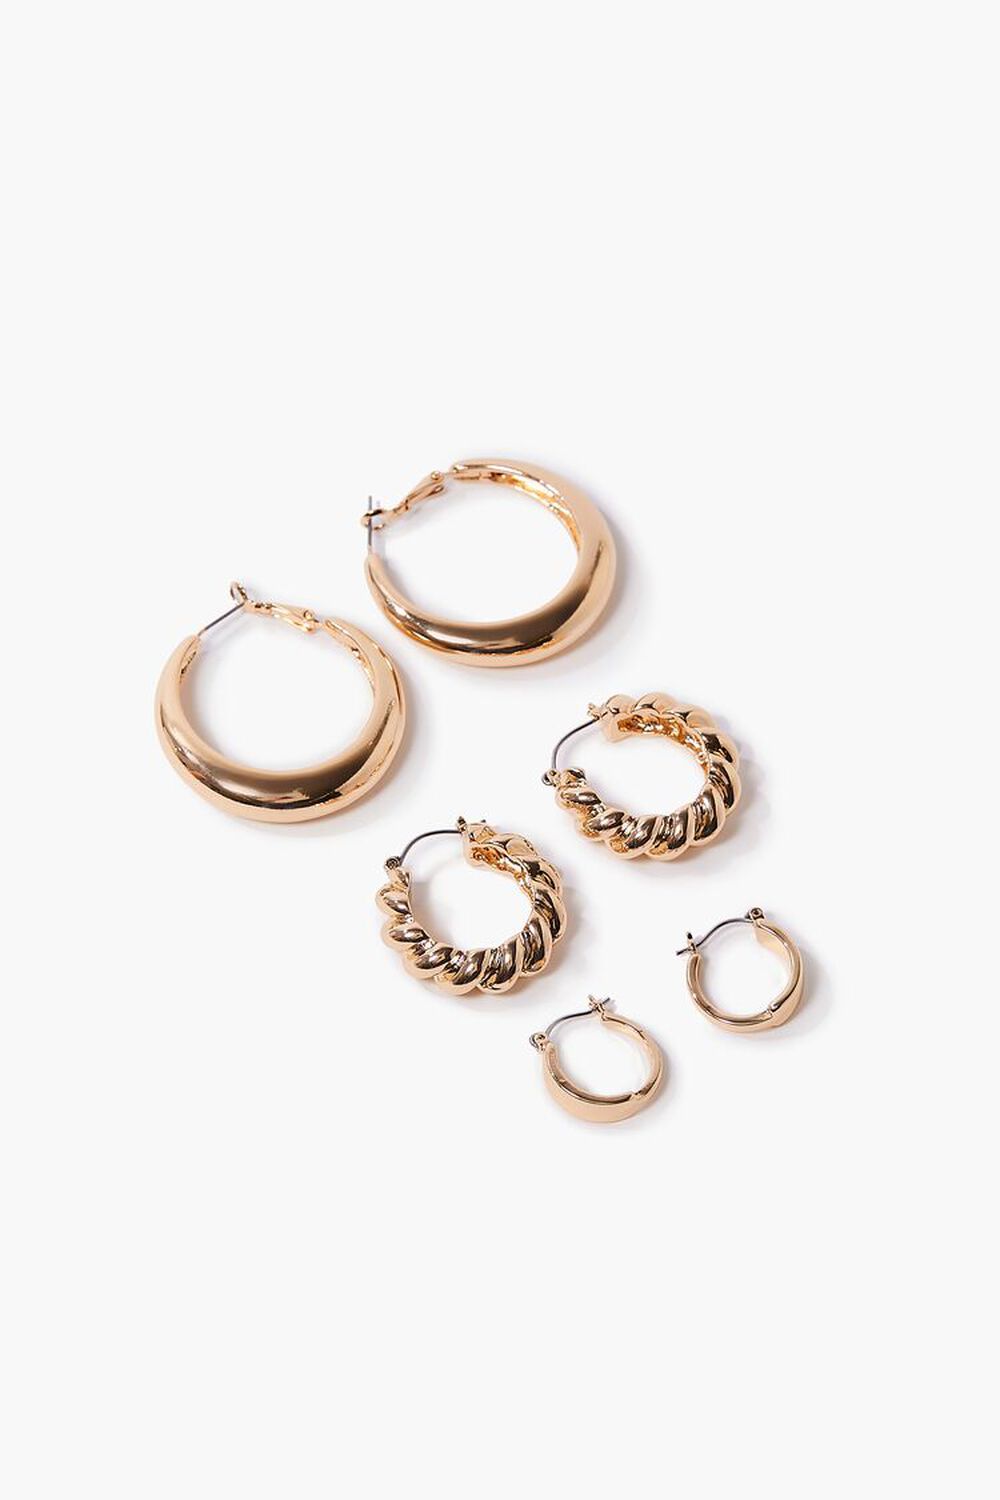 GOLD Twisted & Smooth Hoop Earring Set, image 1